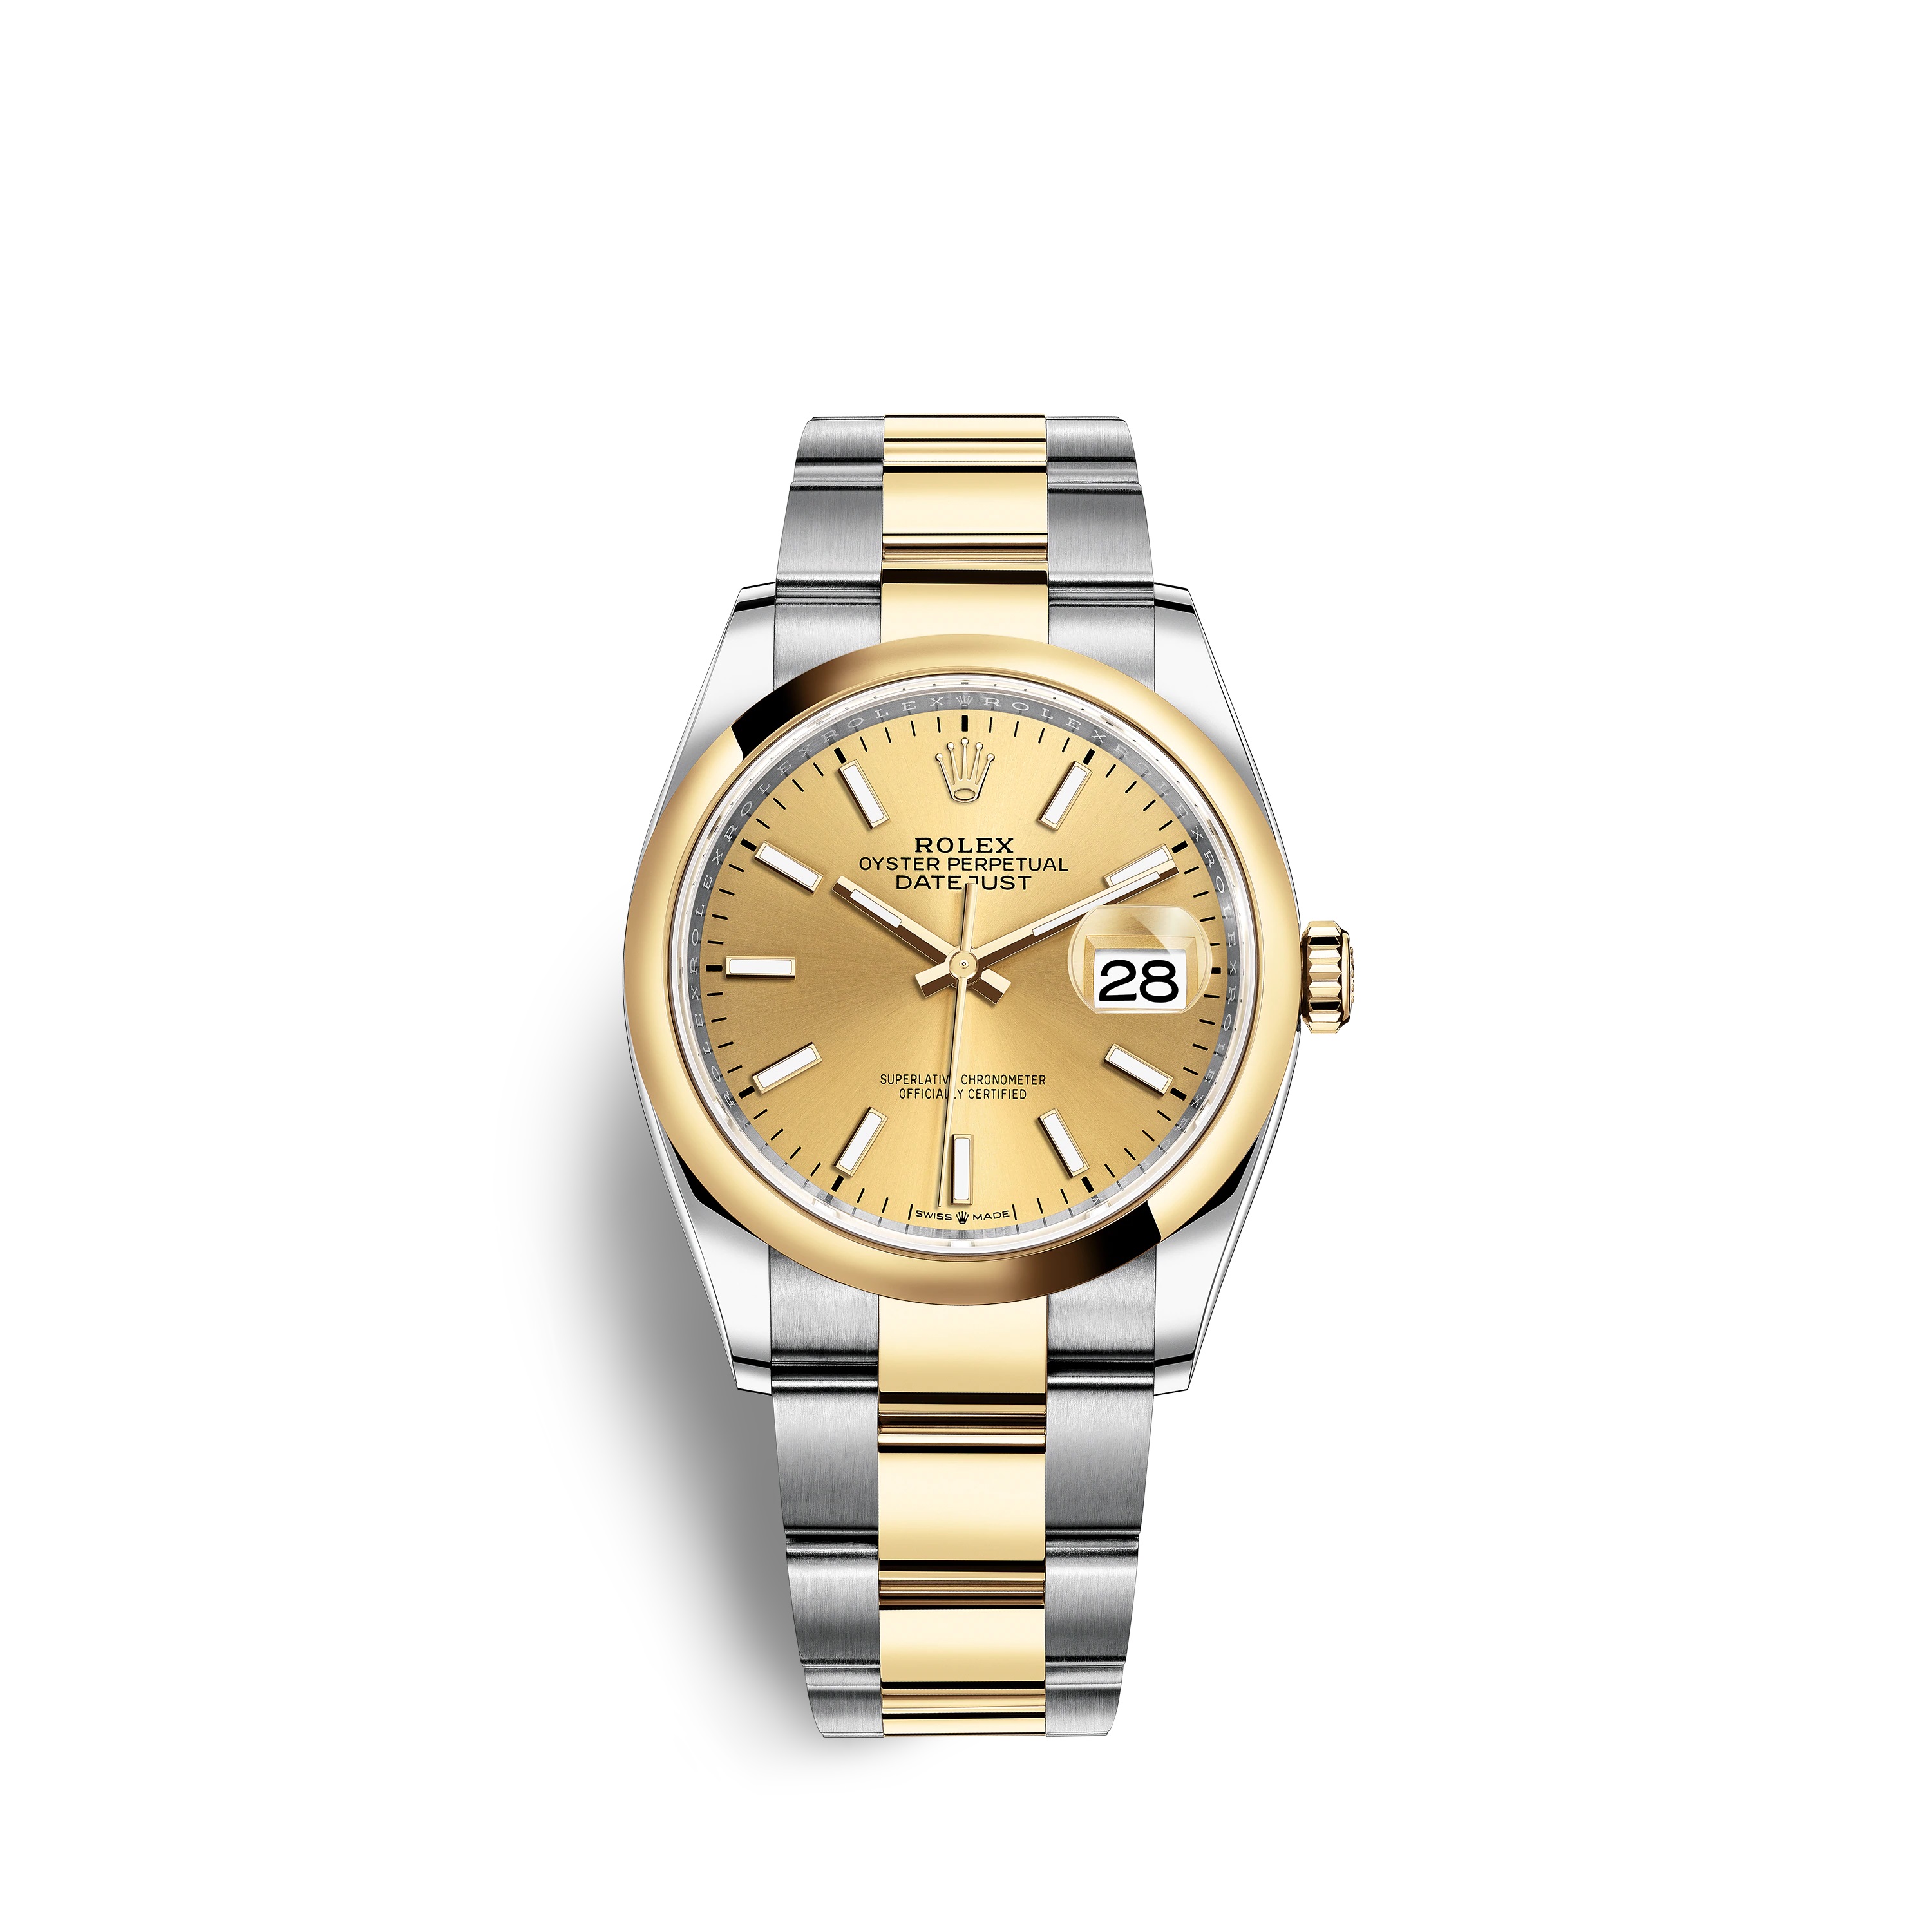 Datejust 36 126203 Gold & Stainless Steel Watch (Champagne)